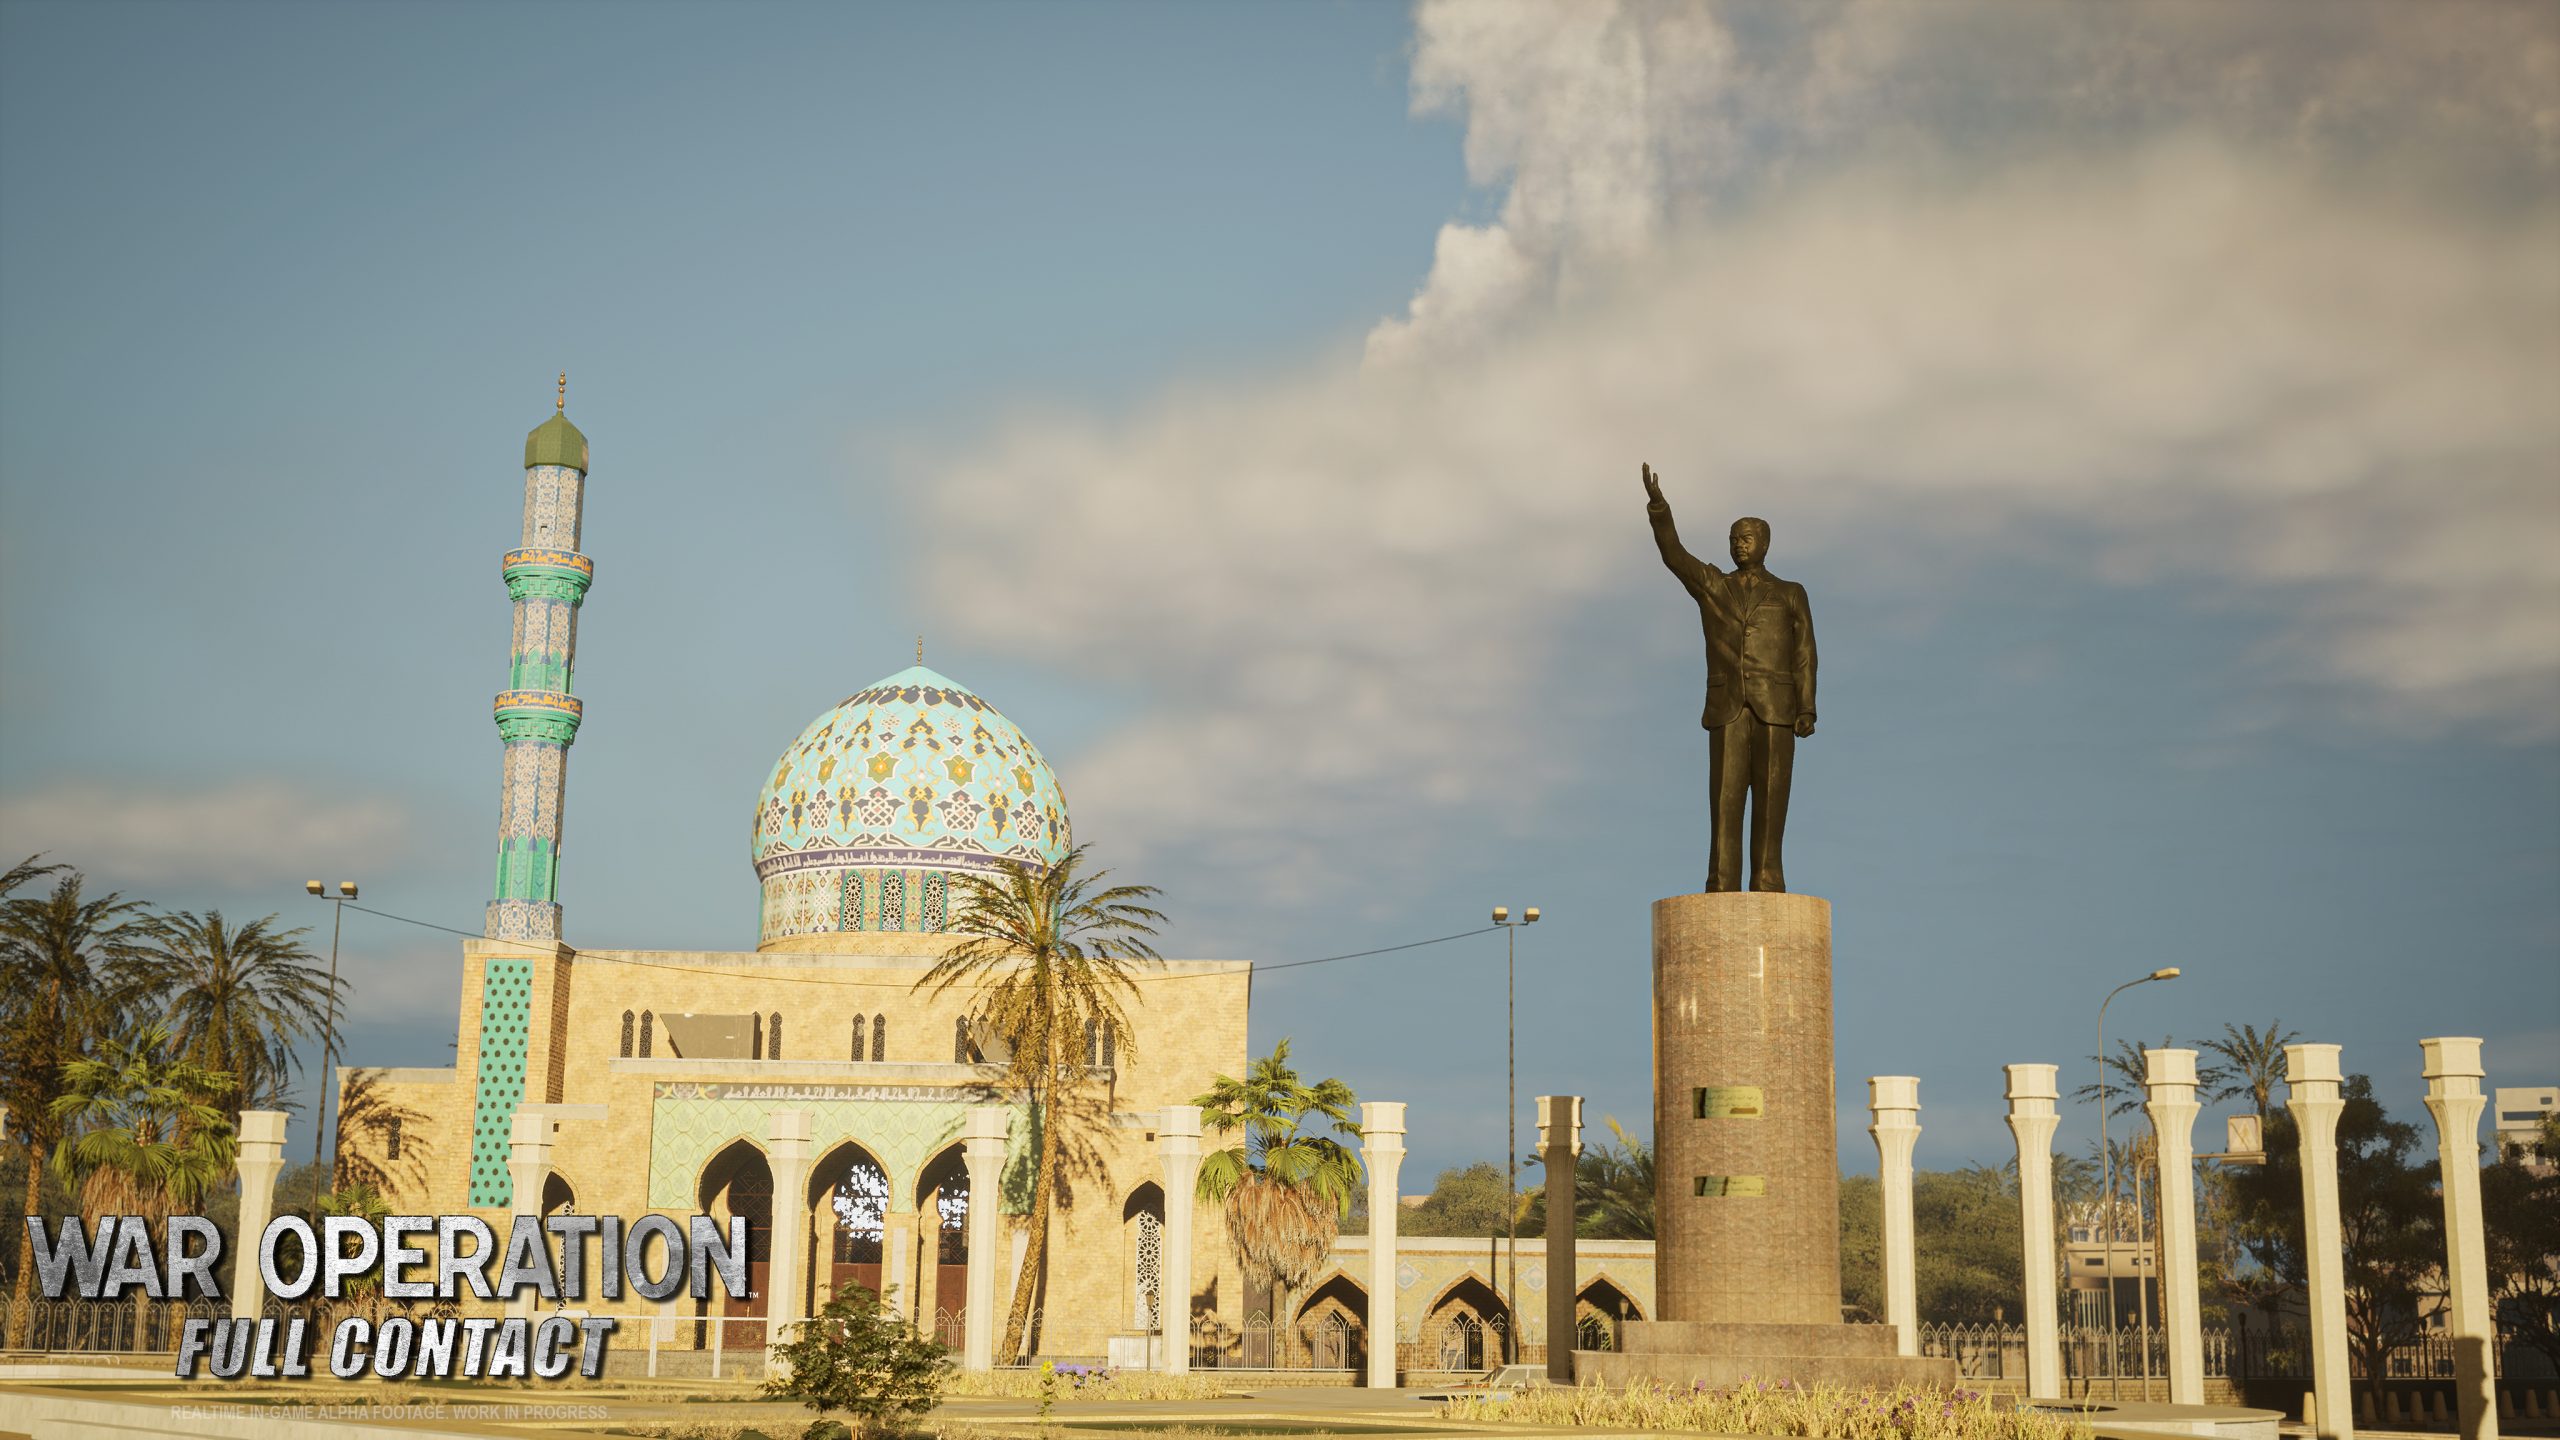 Graphic render of War Operation gameplay, depicting Firdos Square in 2003, with a statue of Saddam Hussein